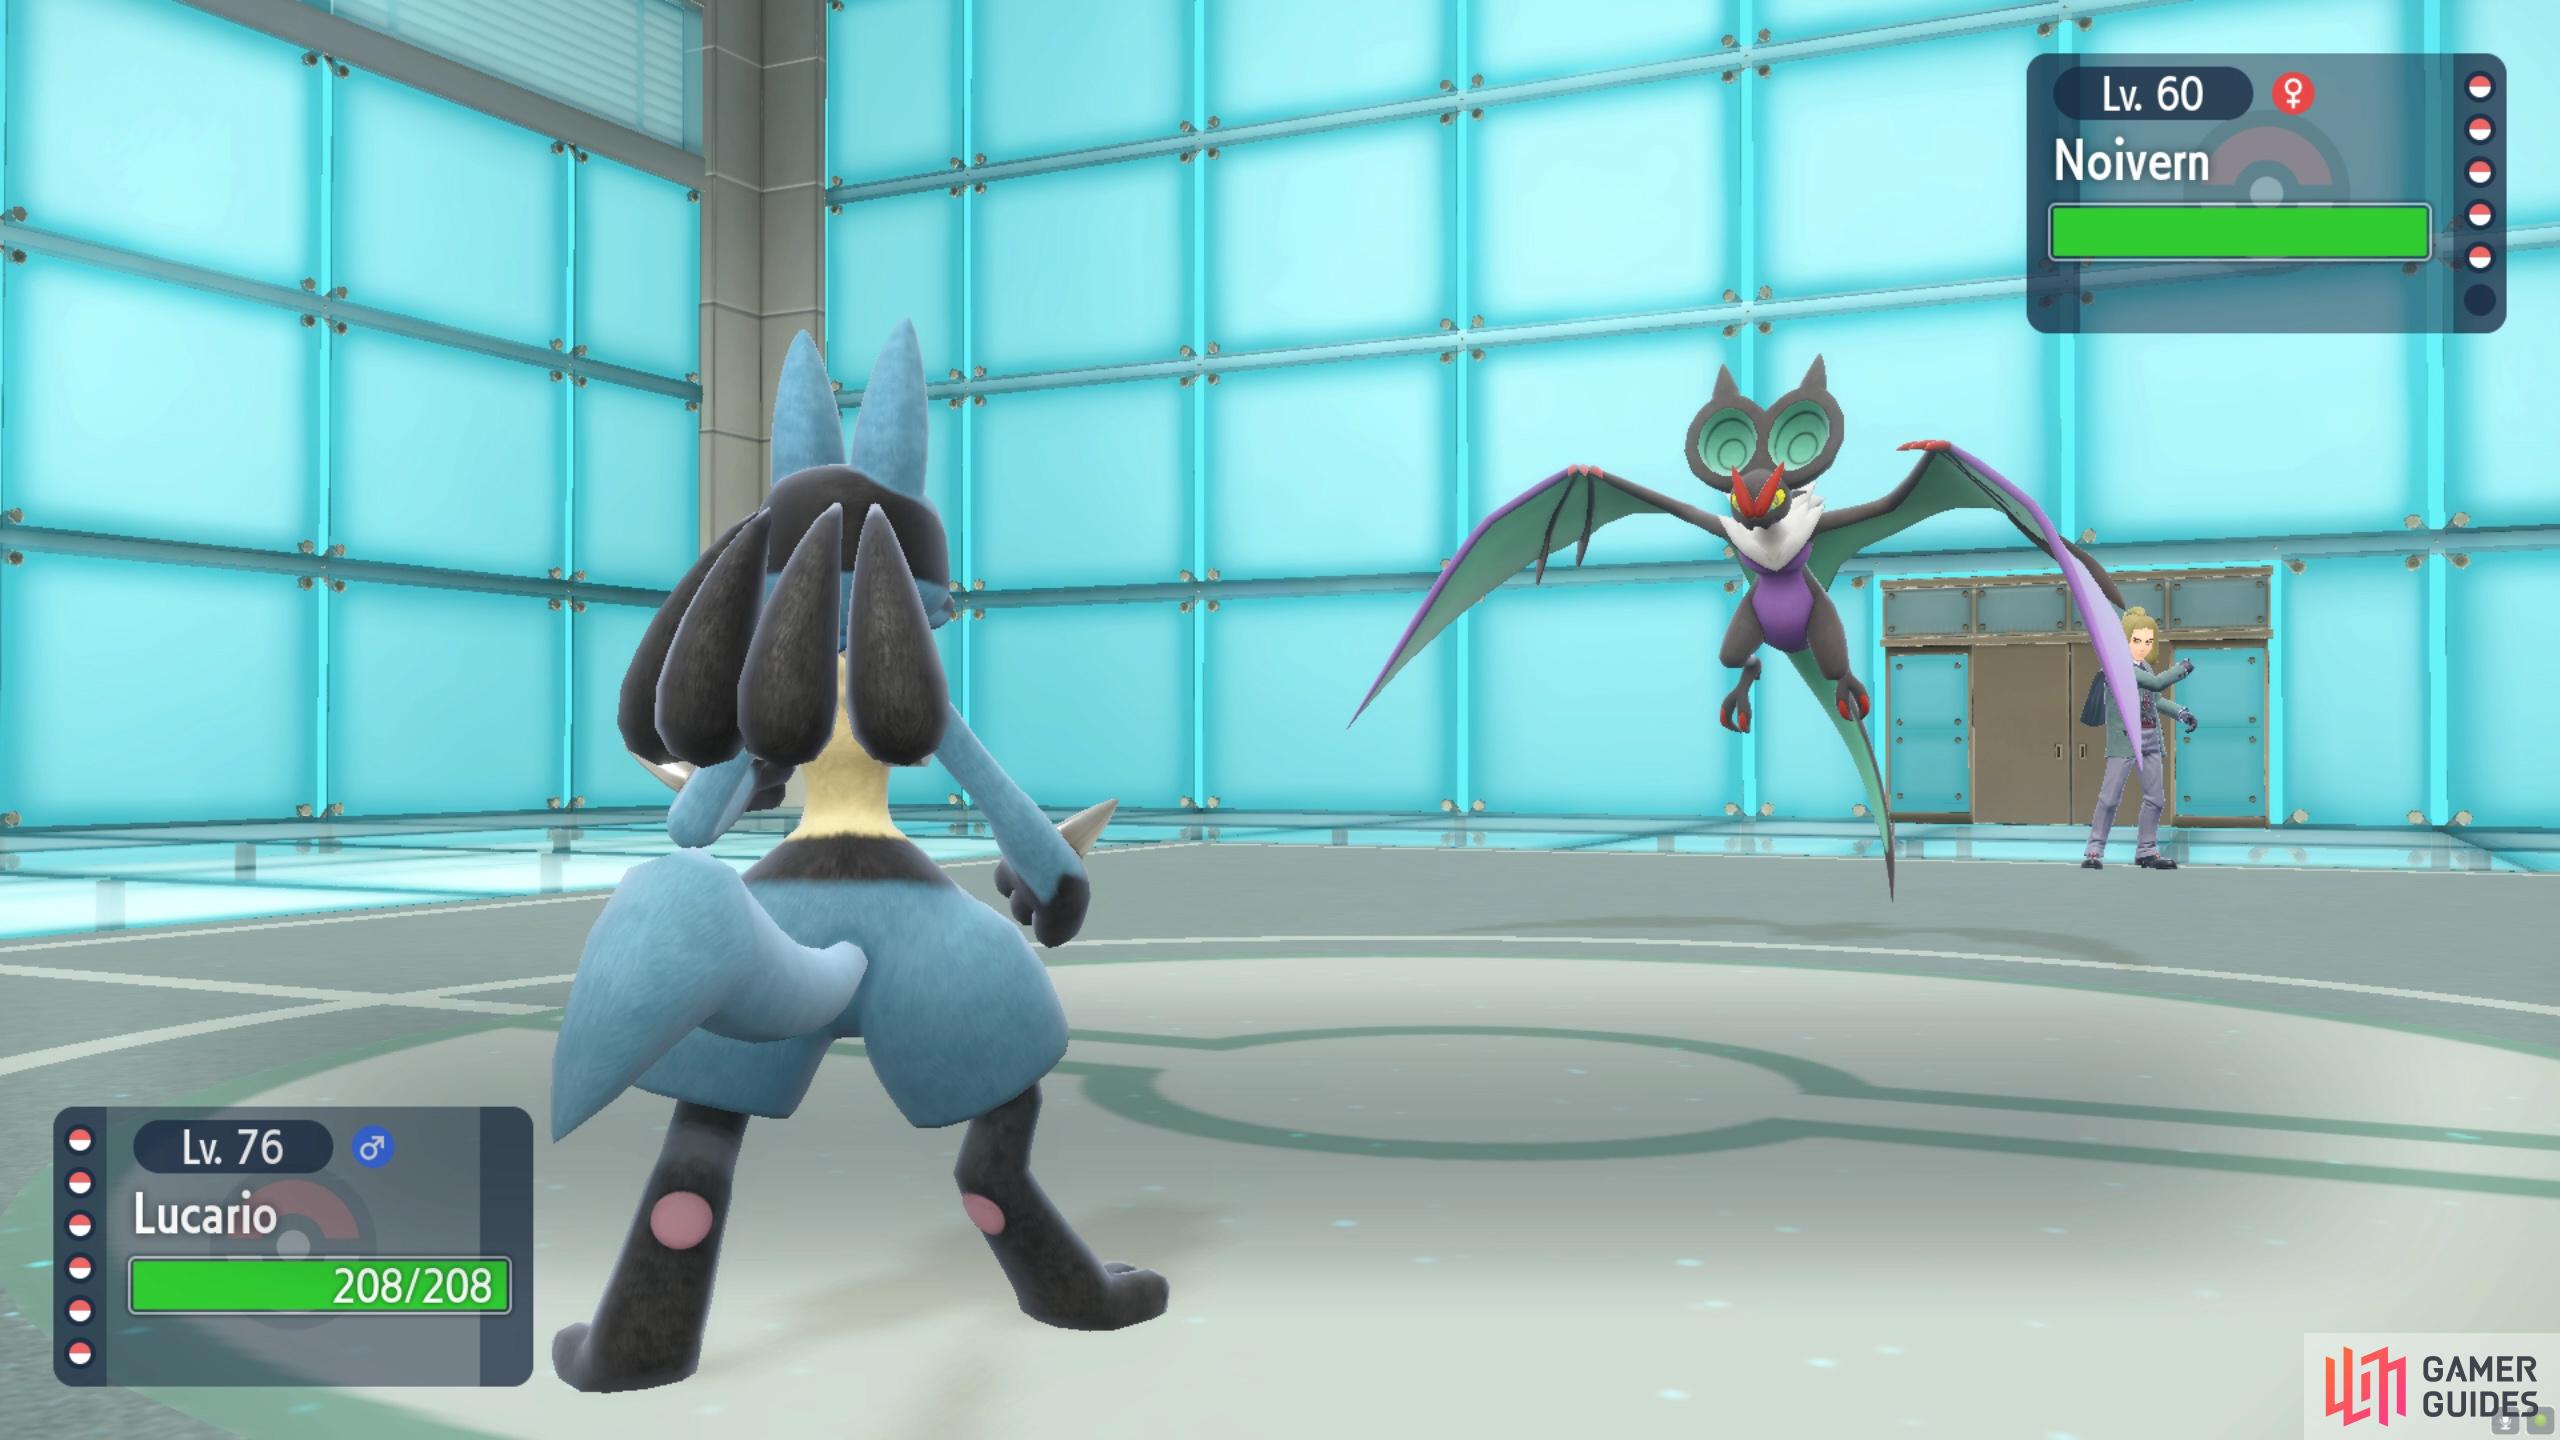 Watch out: Noivern is fast!